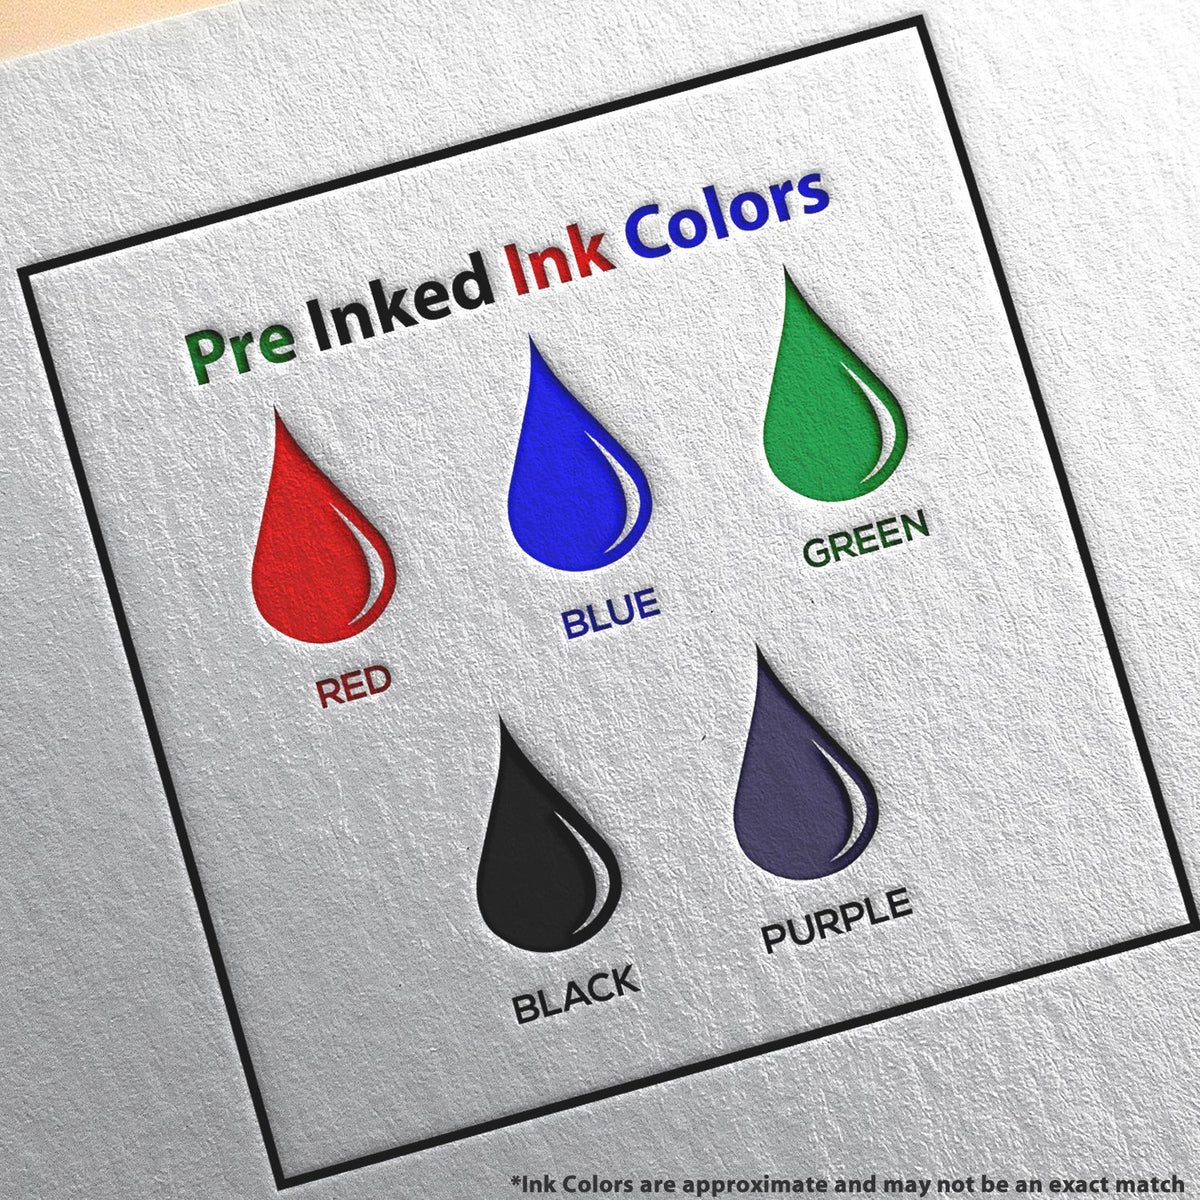 A picture showing the different ink colors or hues available for the Slim Pre-Inked Missouri Landscape Architect Seal Stamp product.